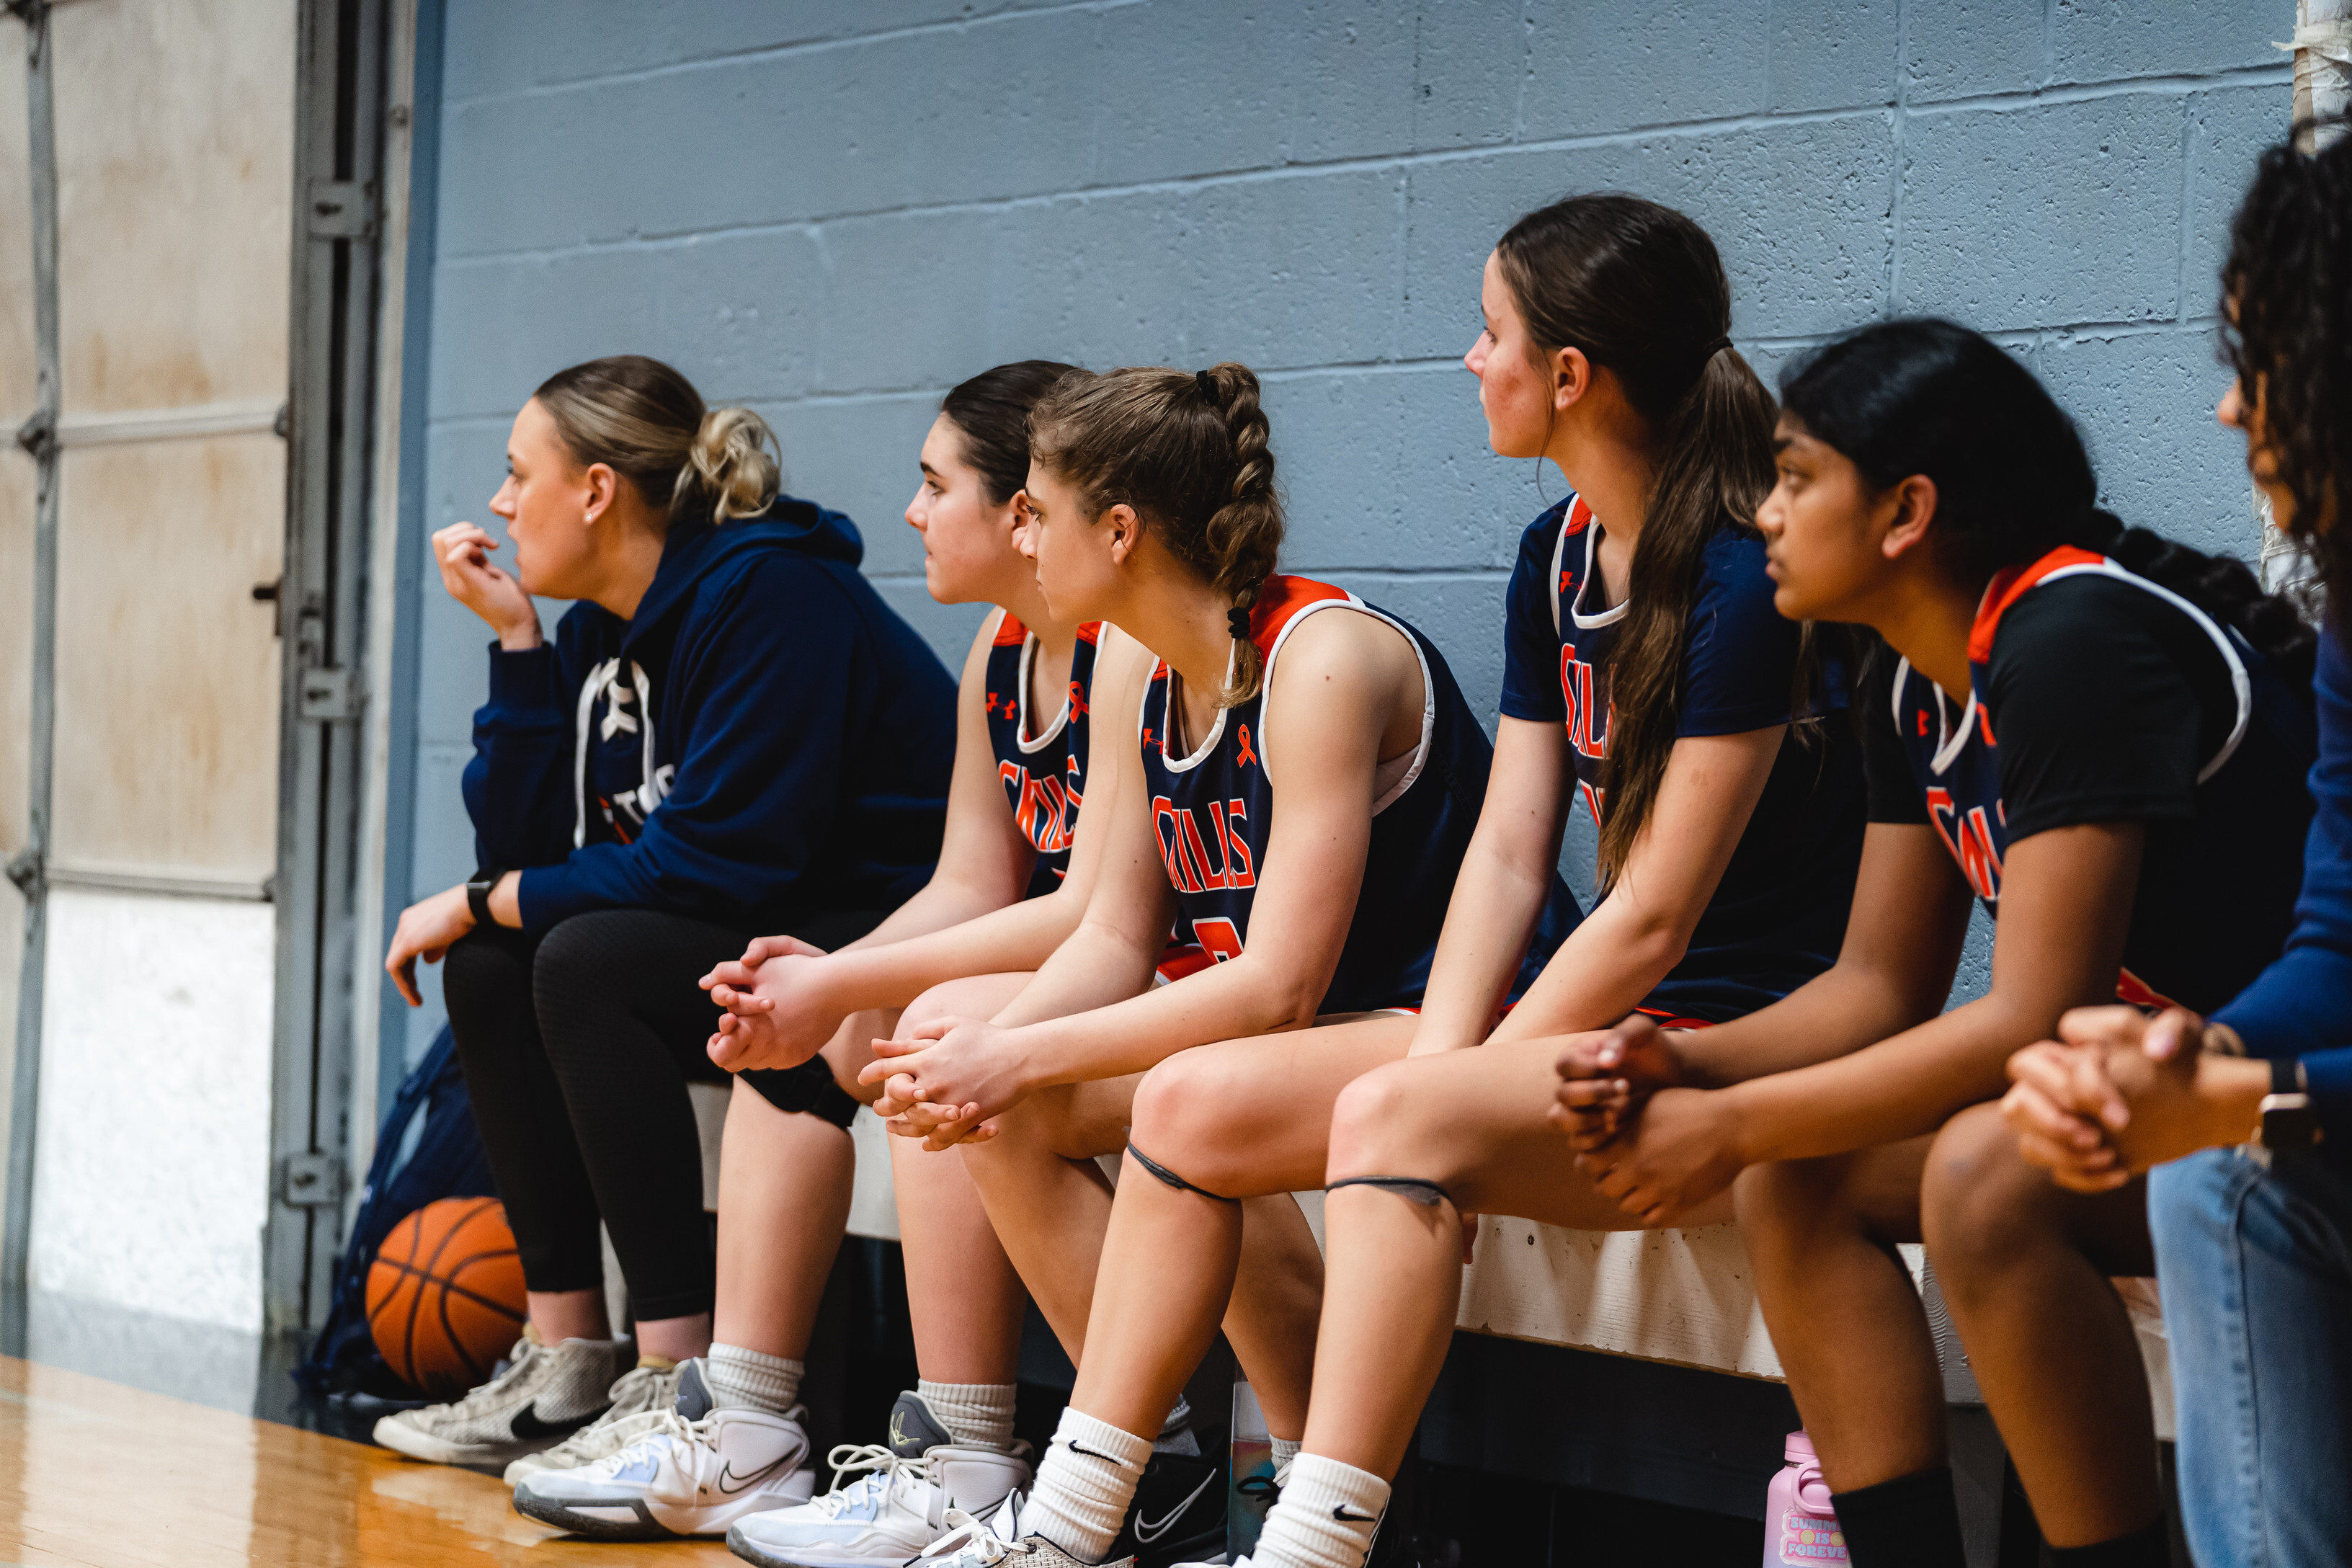 A youth basketball team sits on the bench watching the game